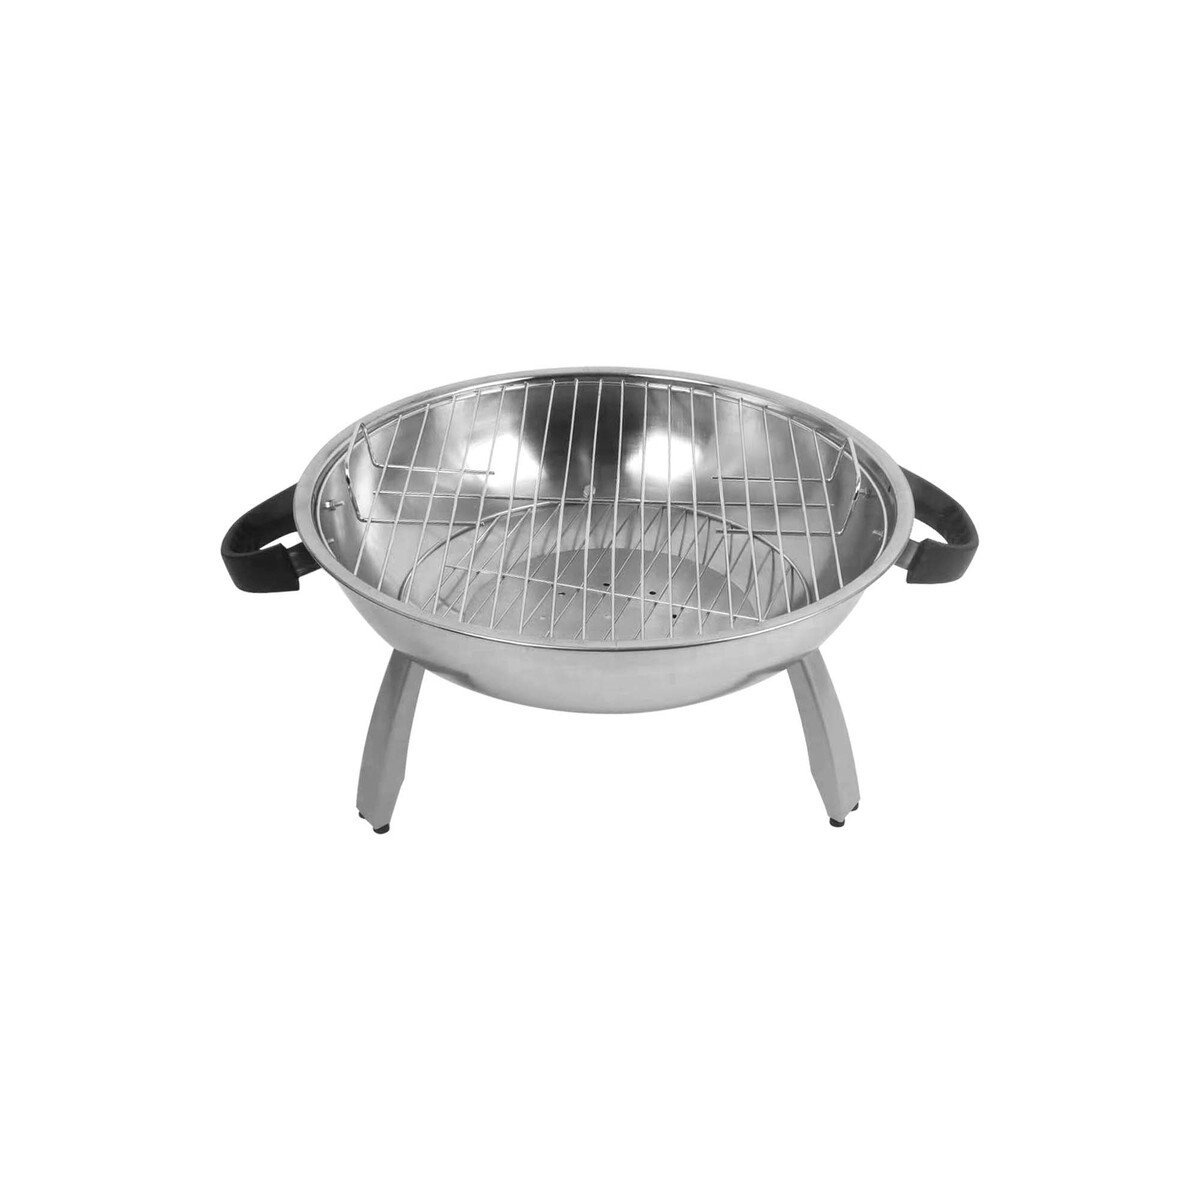 Relax BBQ Grill 35cm YH22014